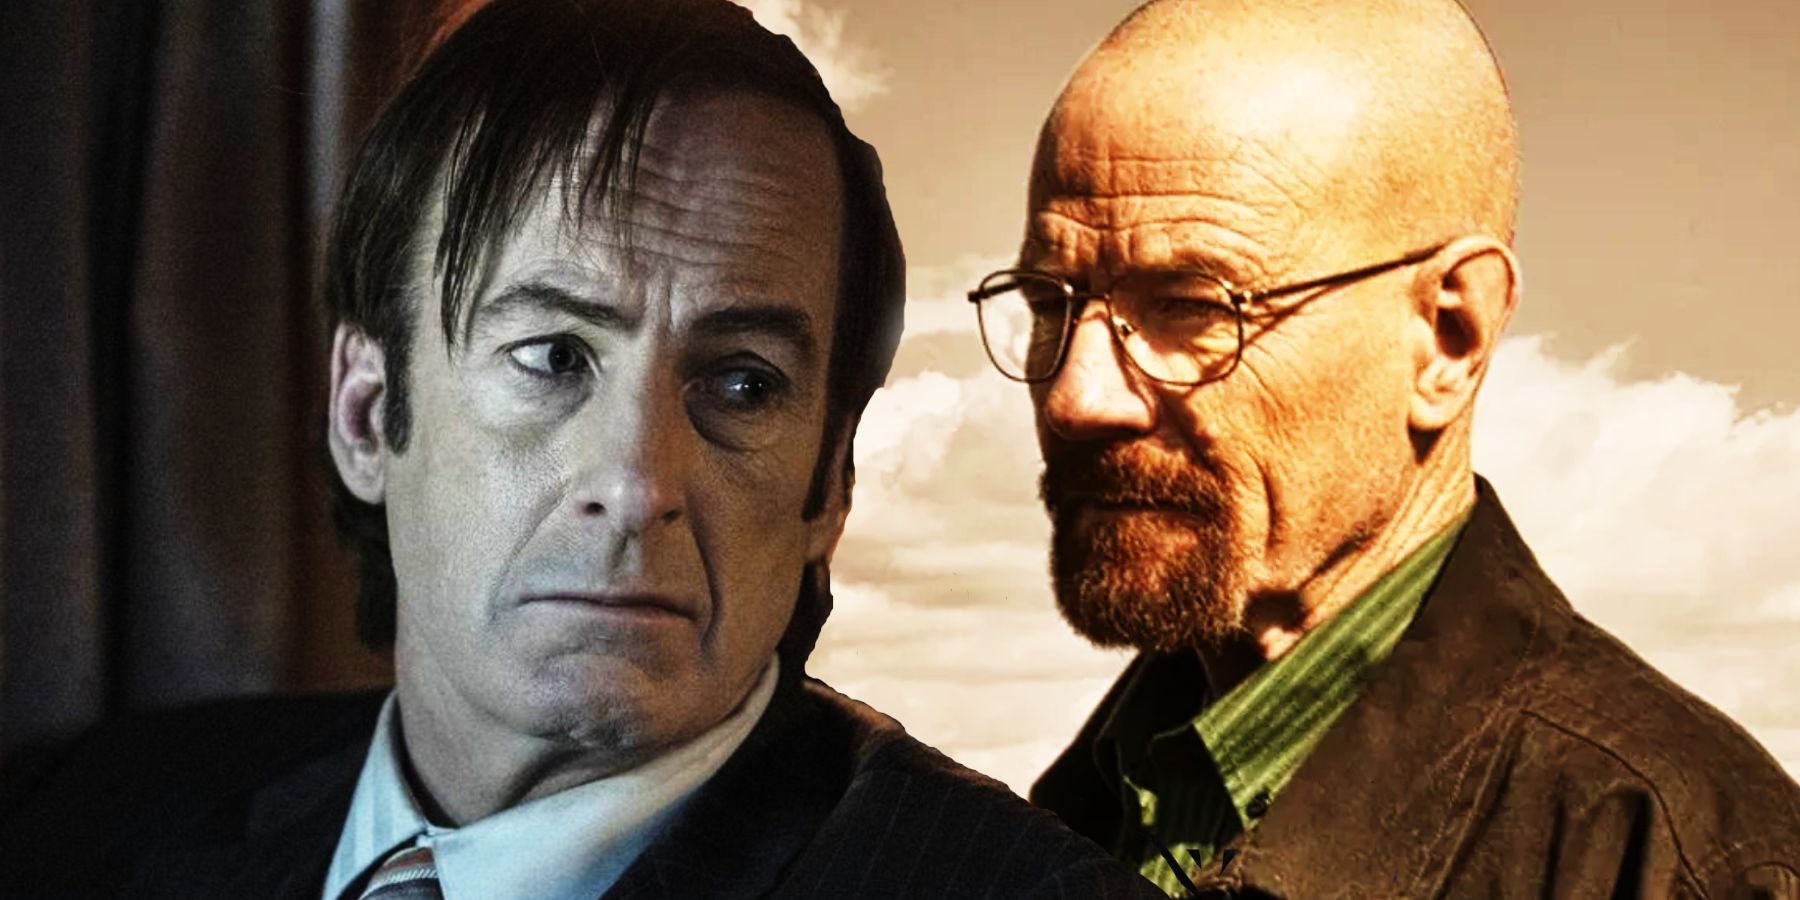 Bob Odenkirk as Jimmy McGill in Better Call Saul and Bryan Cranston as Walter White in Breaking Bad